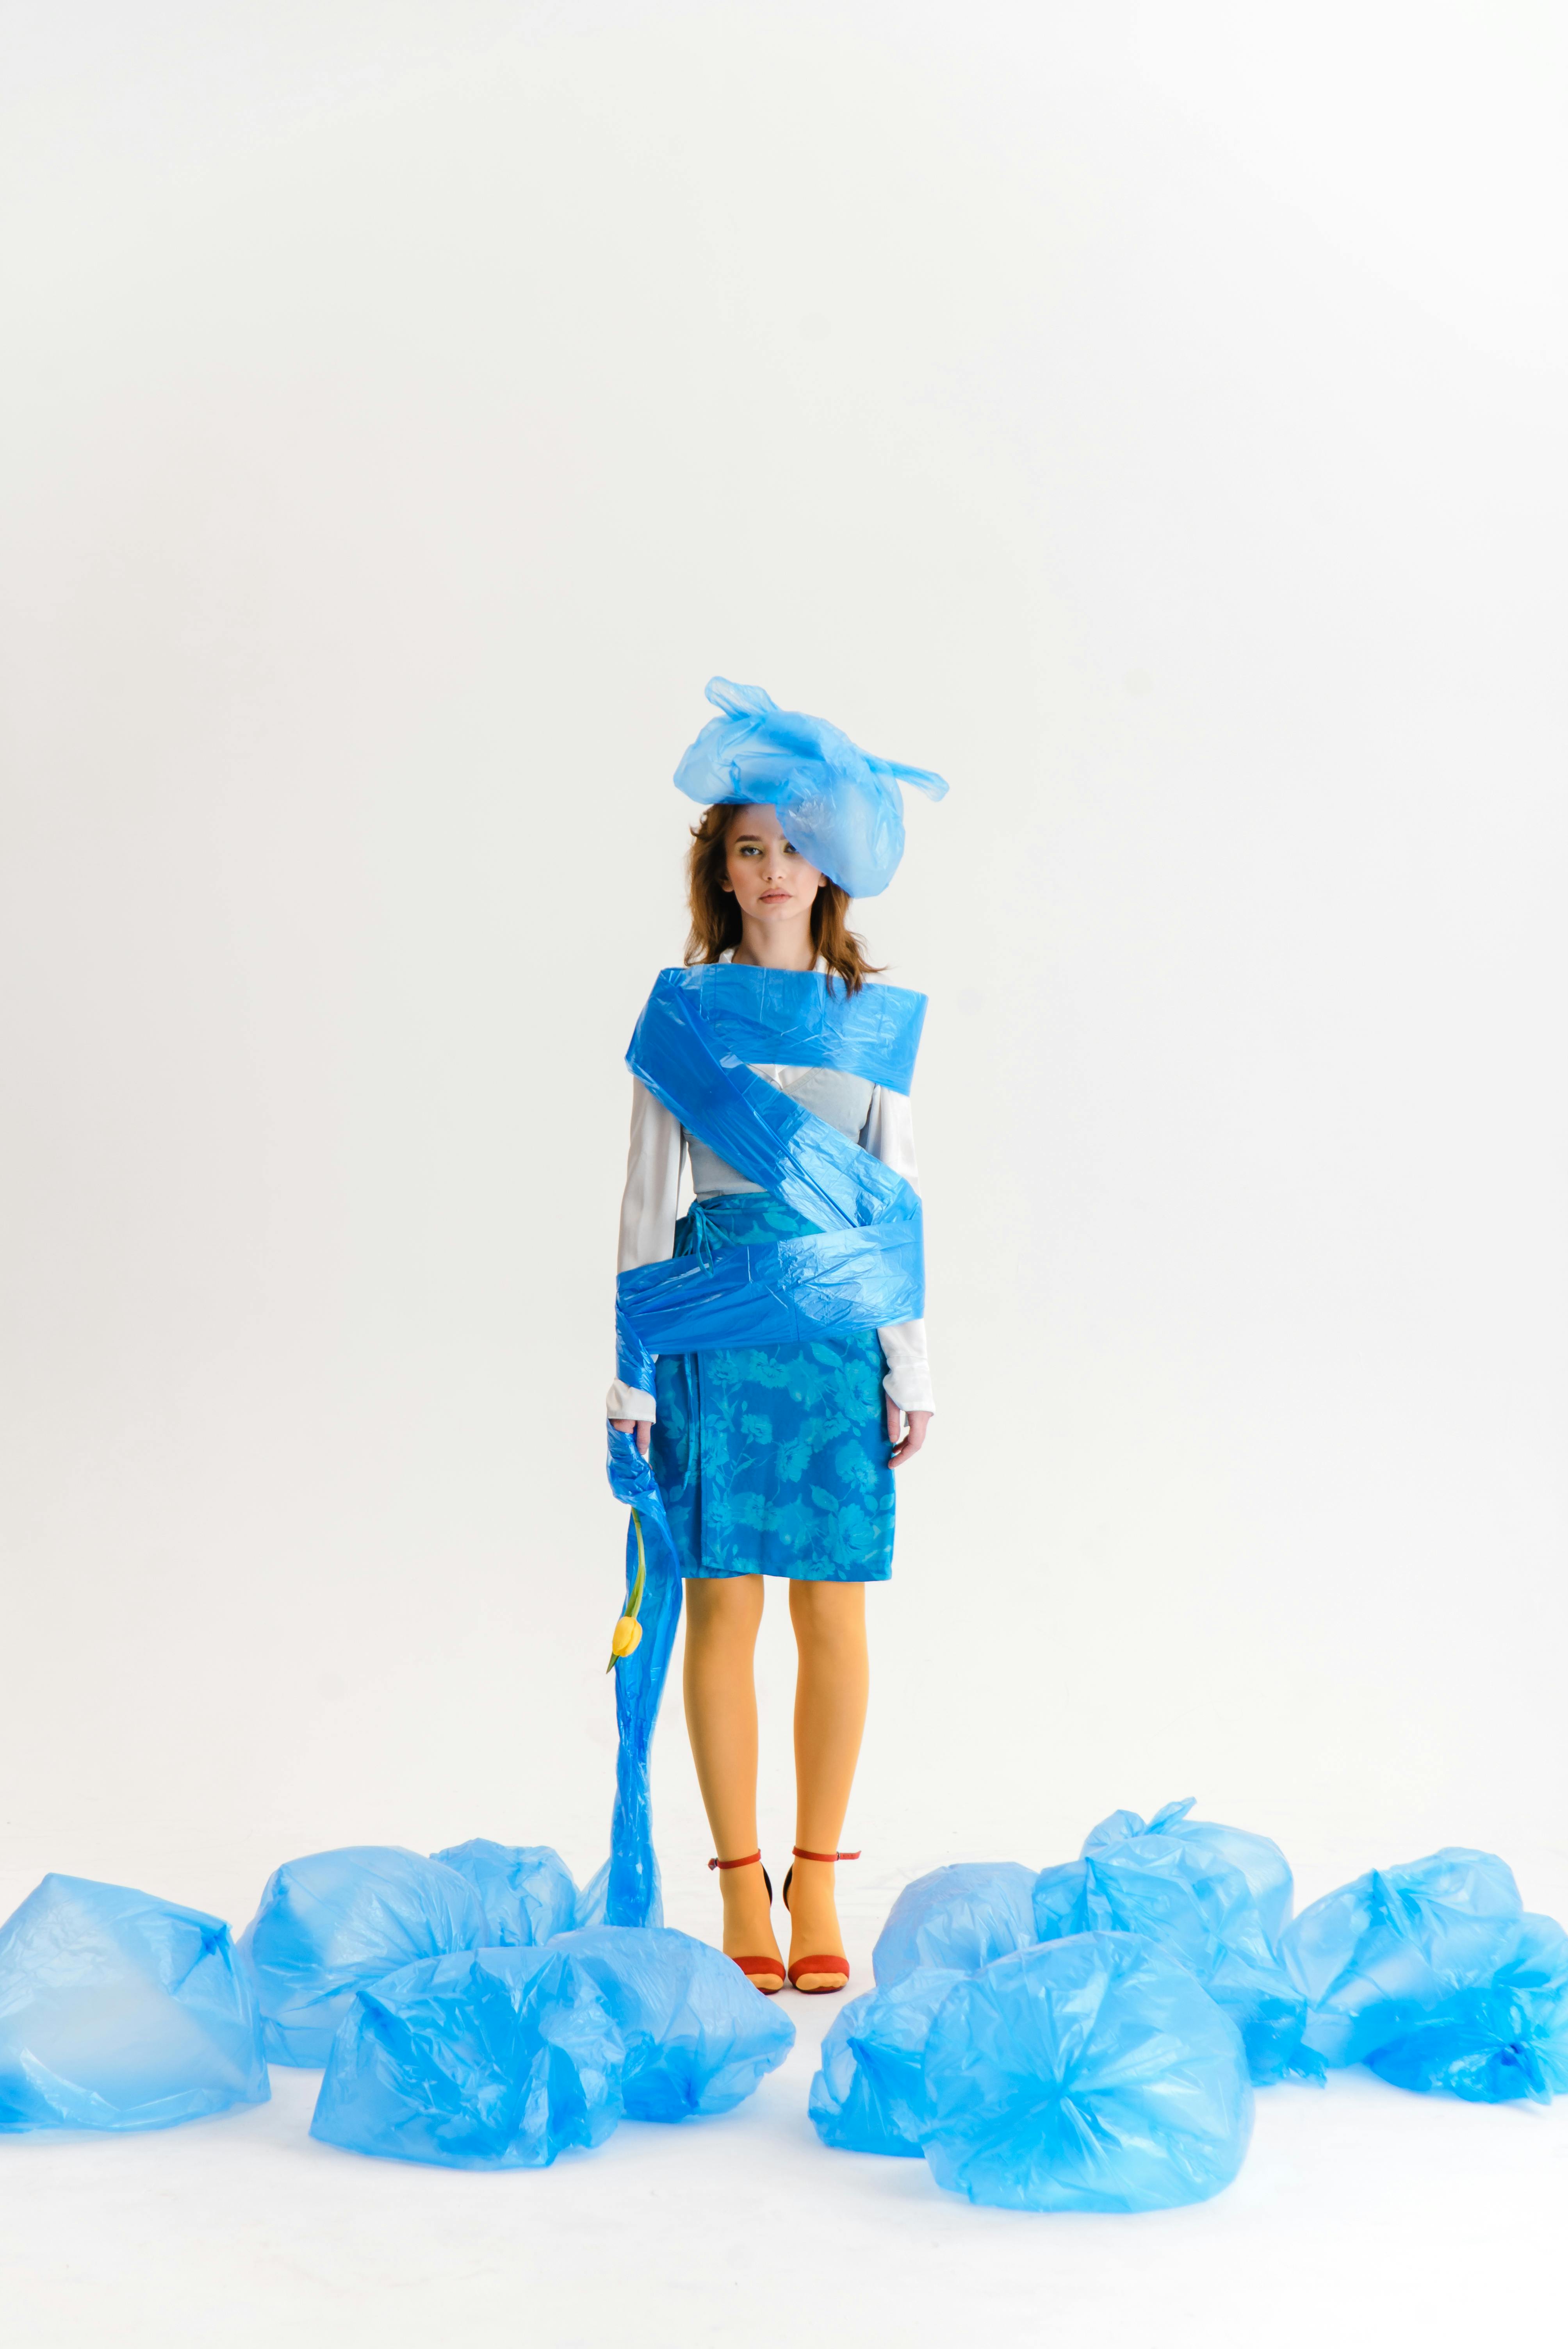 Woman Wrapped in Blue Garbage Bags · Free Stock Photo